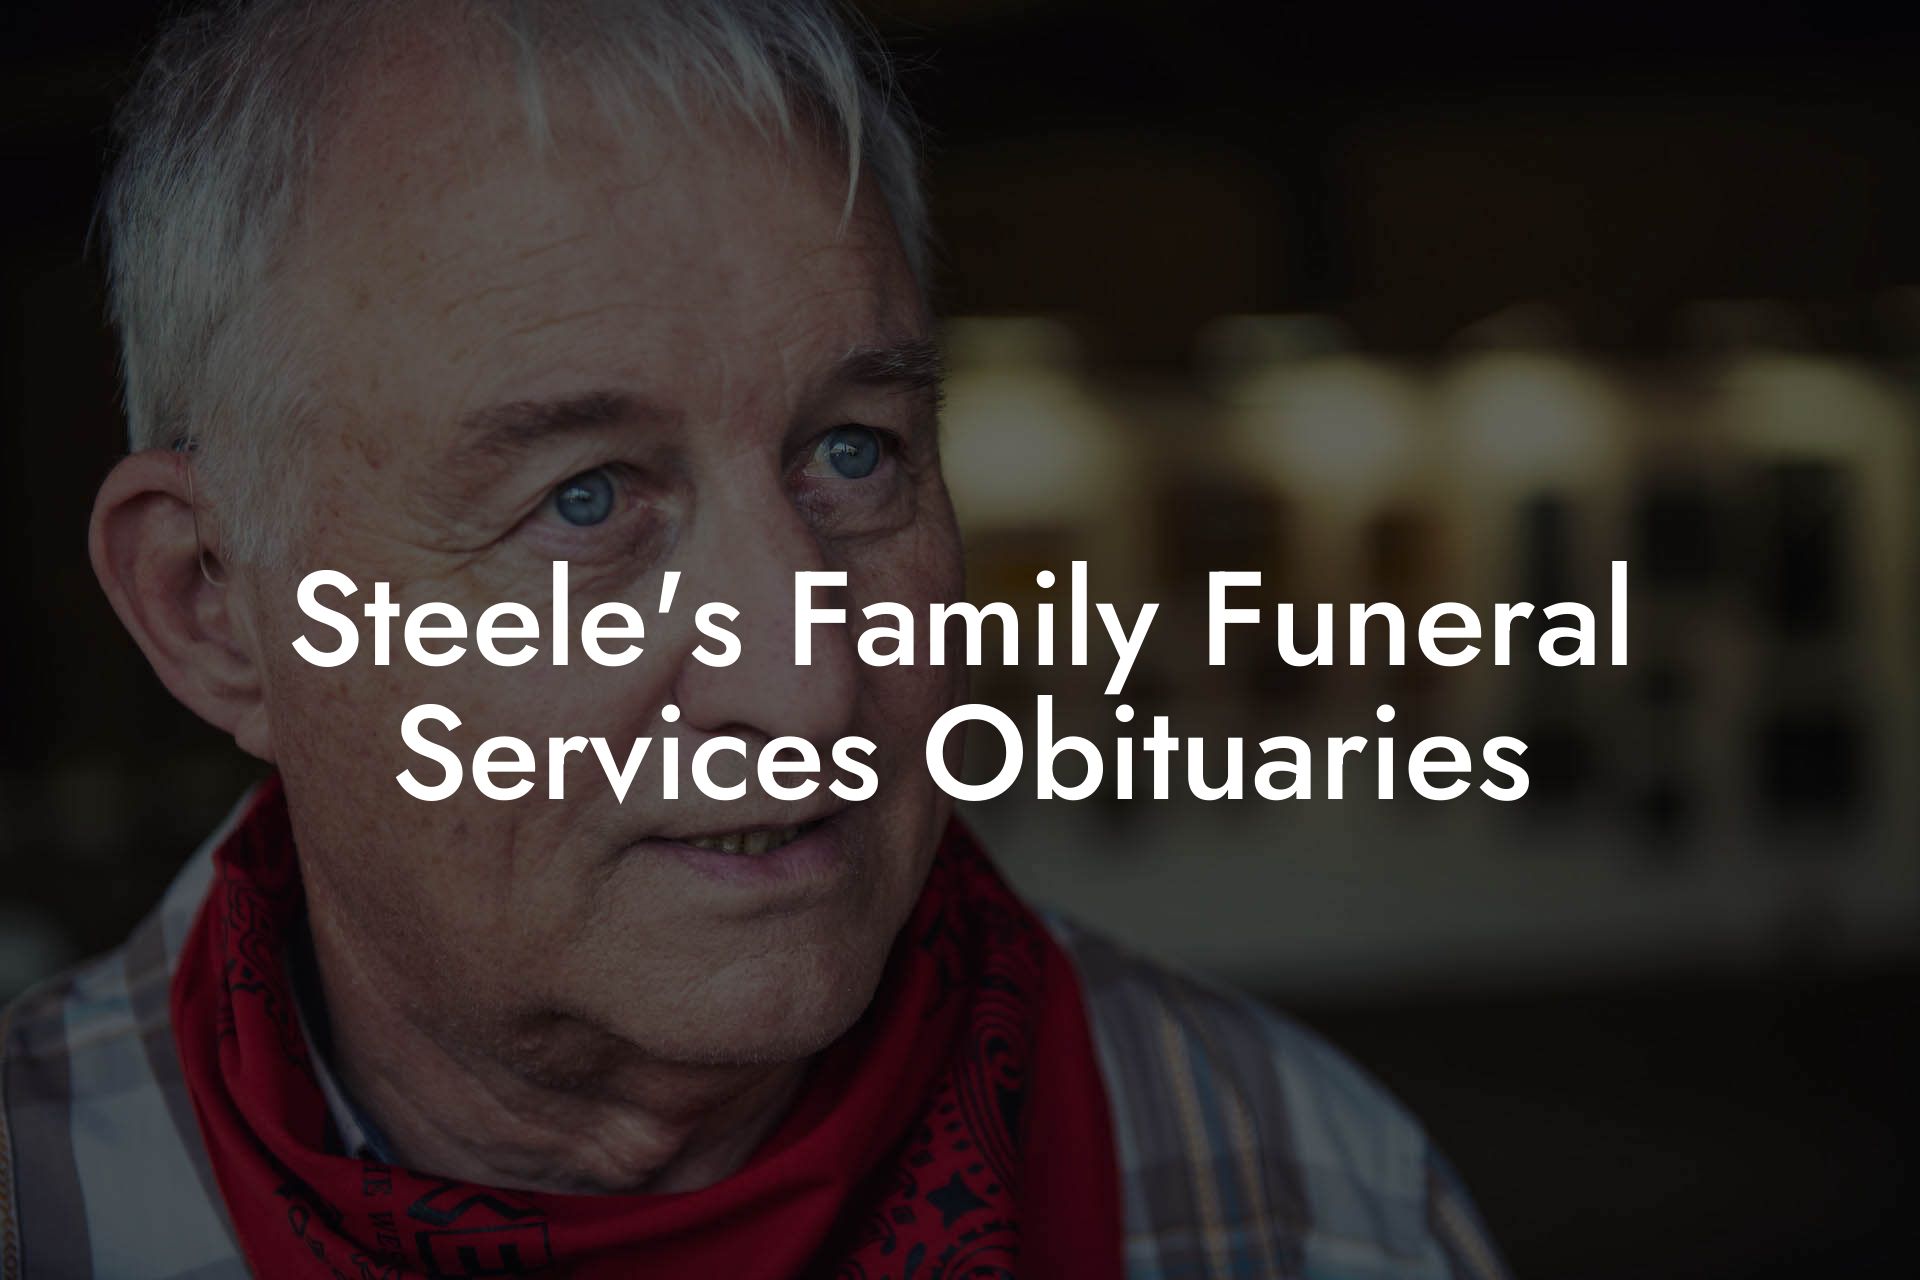 Steele's Family Funeral Services Obituaries